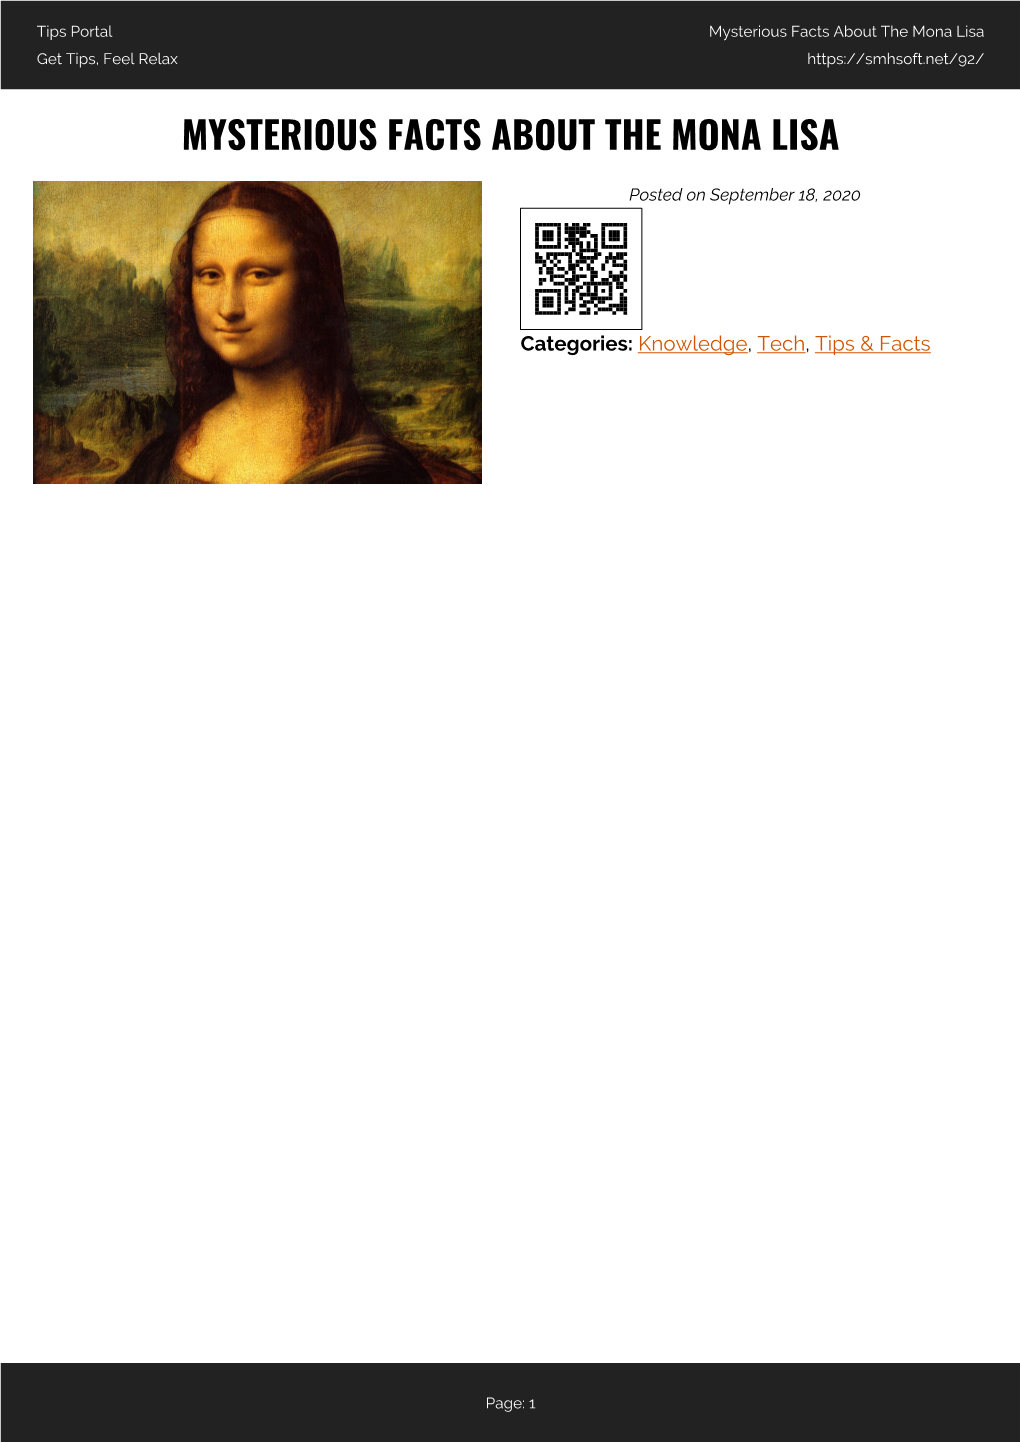 Mysterious Facts About the Mona Lisa Get Tips, Feel Relax